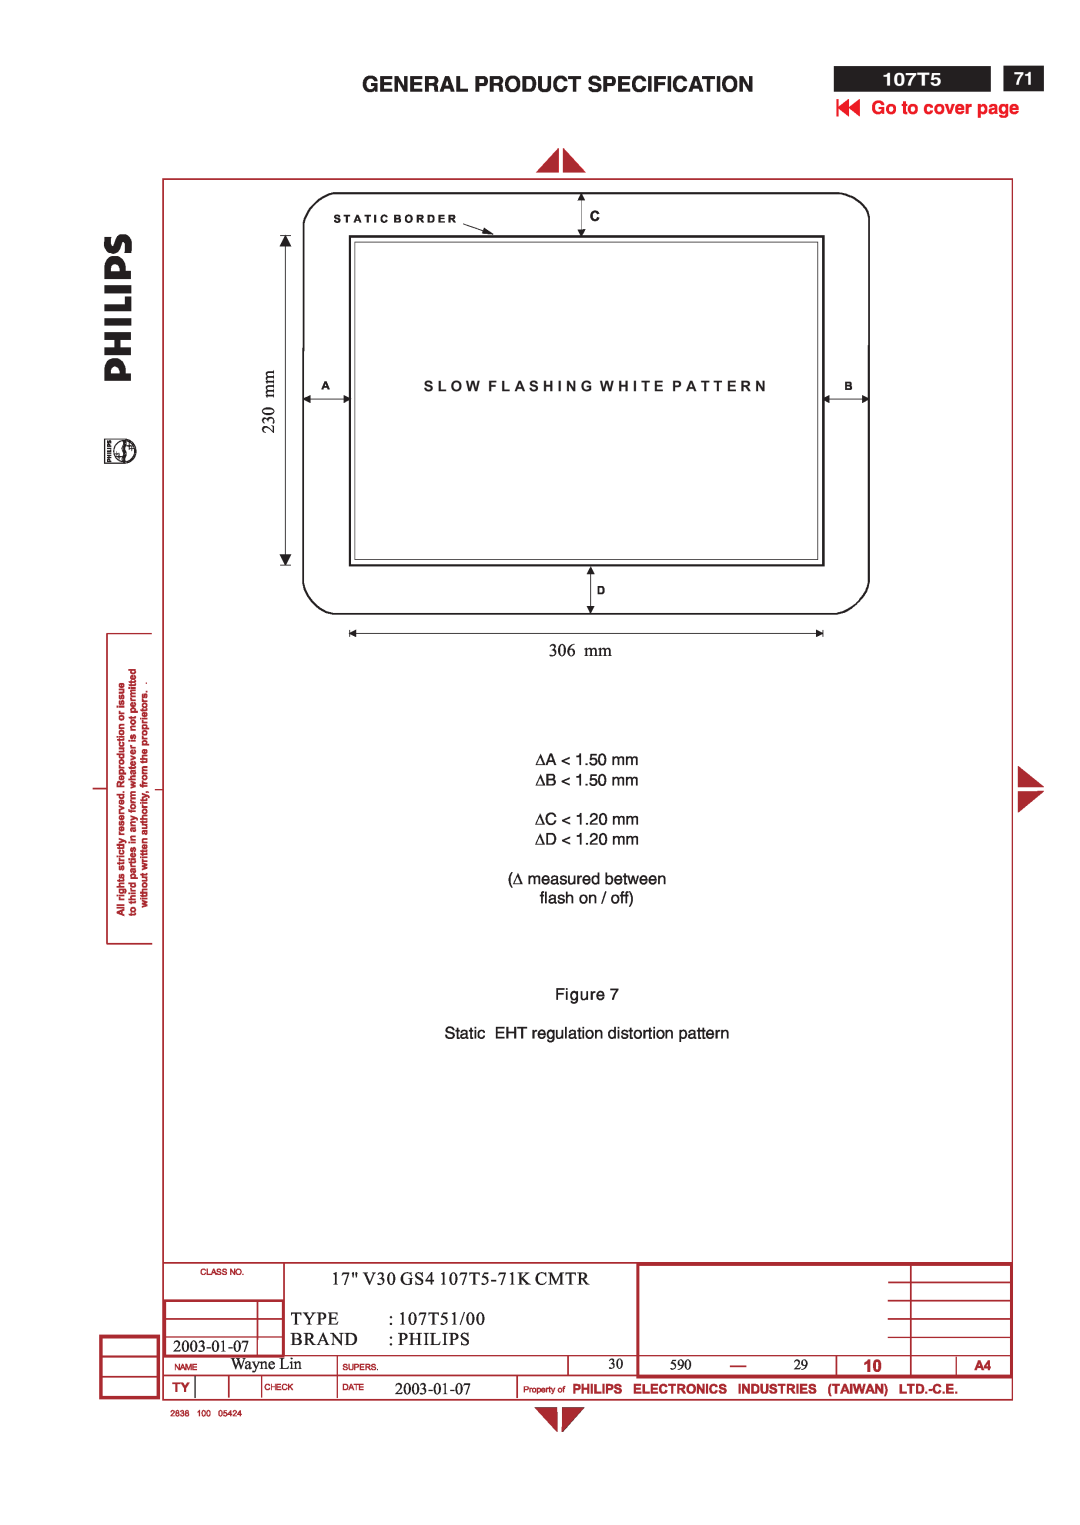 Philips General Product Specification, Go to cover page, 230 mm, 306 mm, 17 V30 GS4 107T5-71K CMTR, Type, 107T51/00 